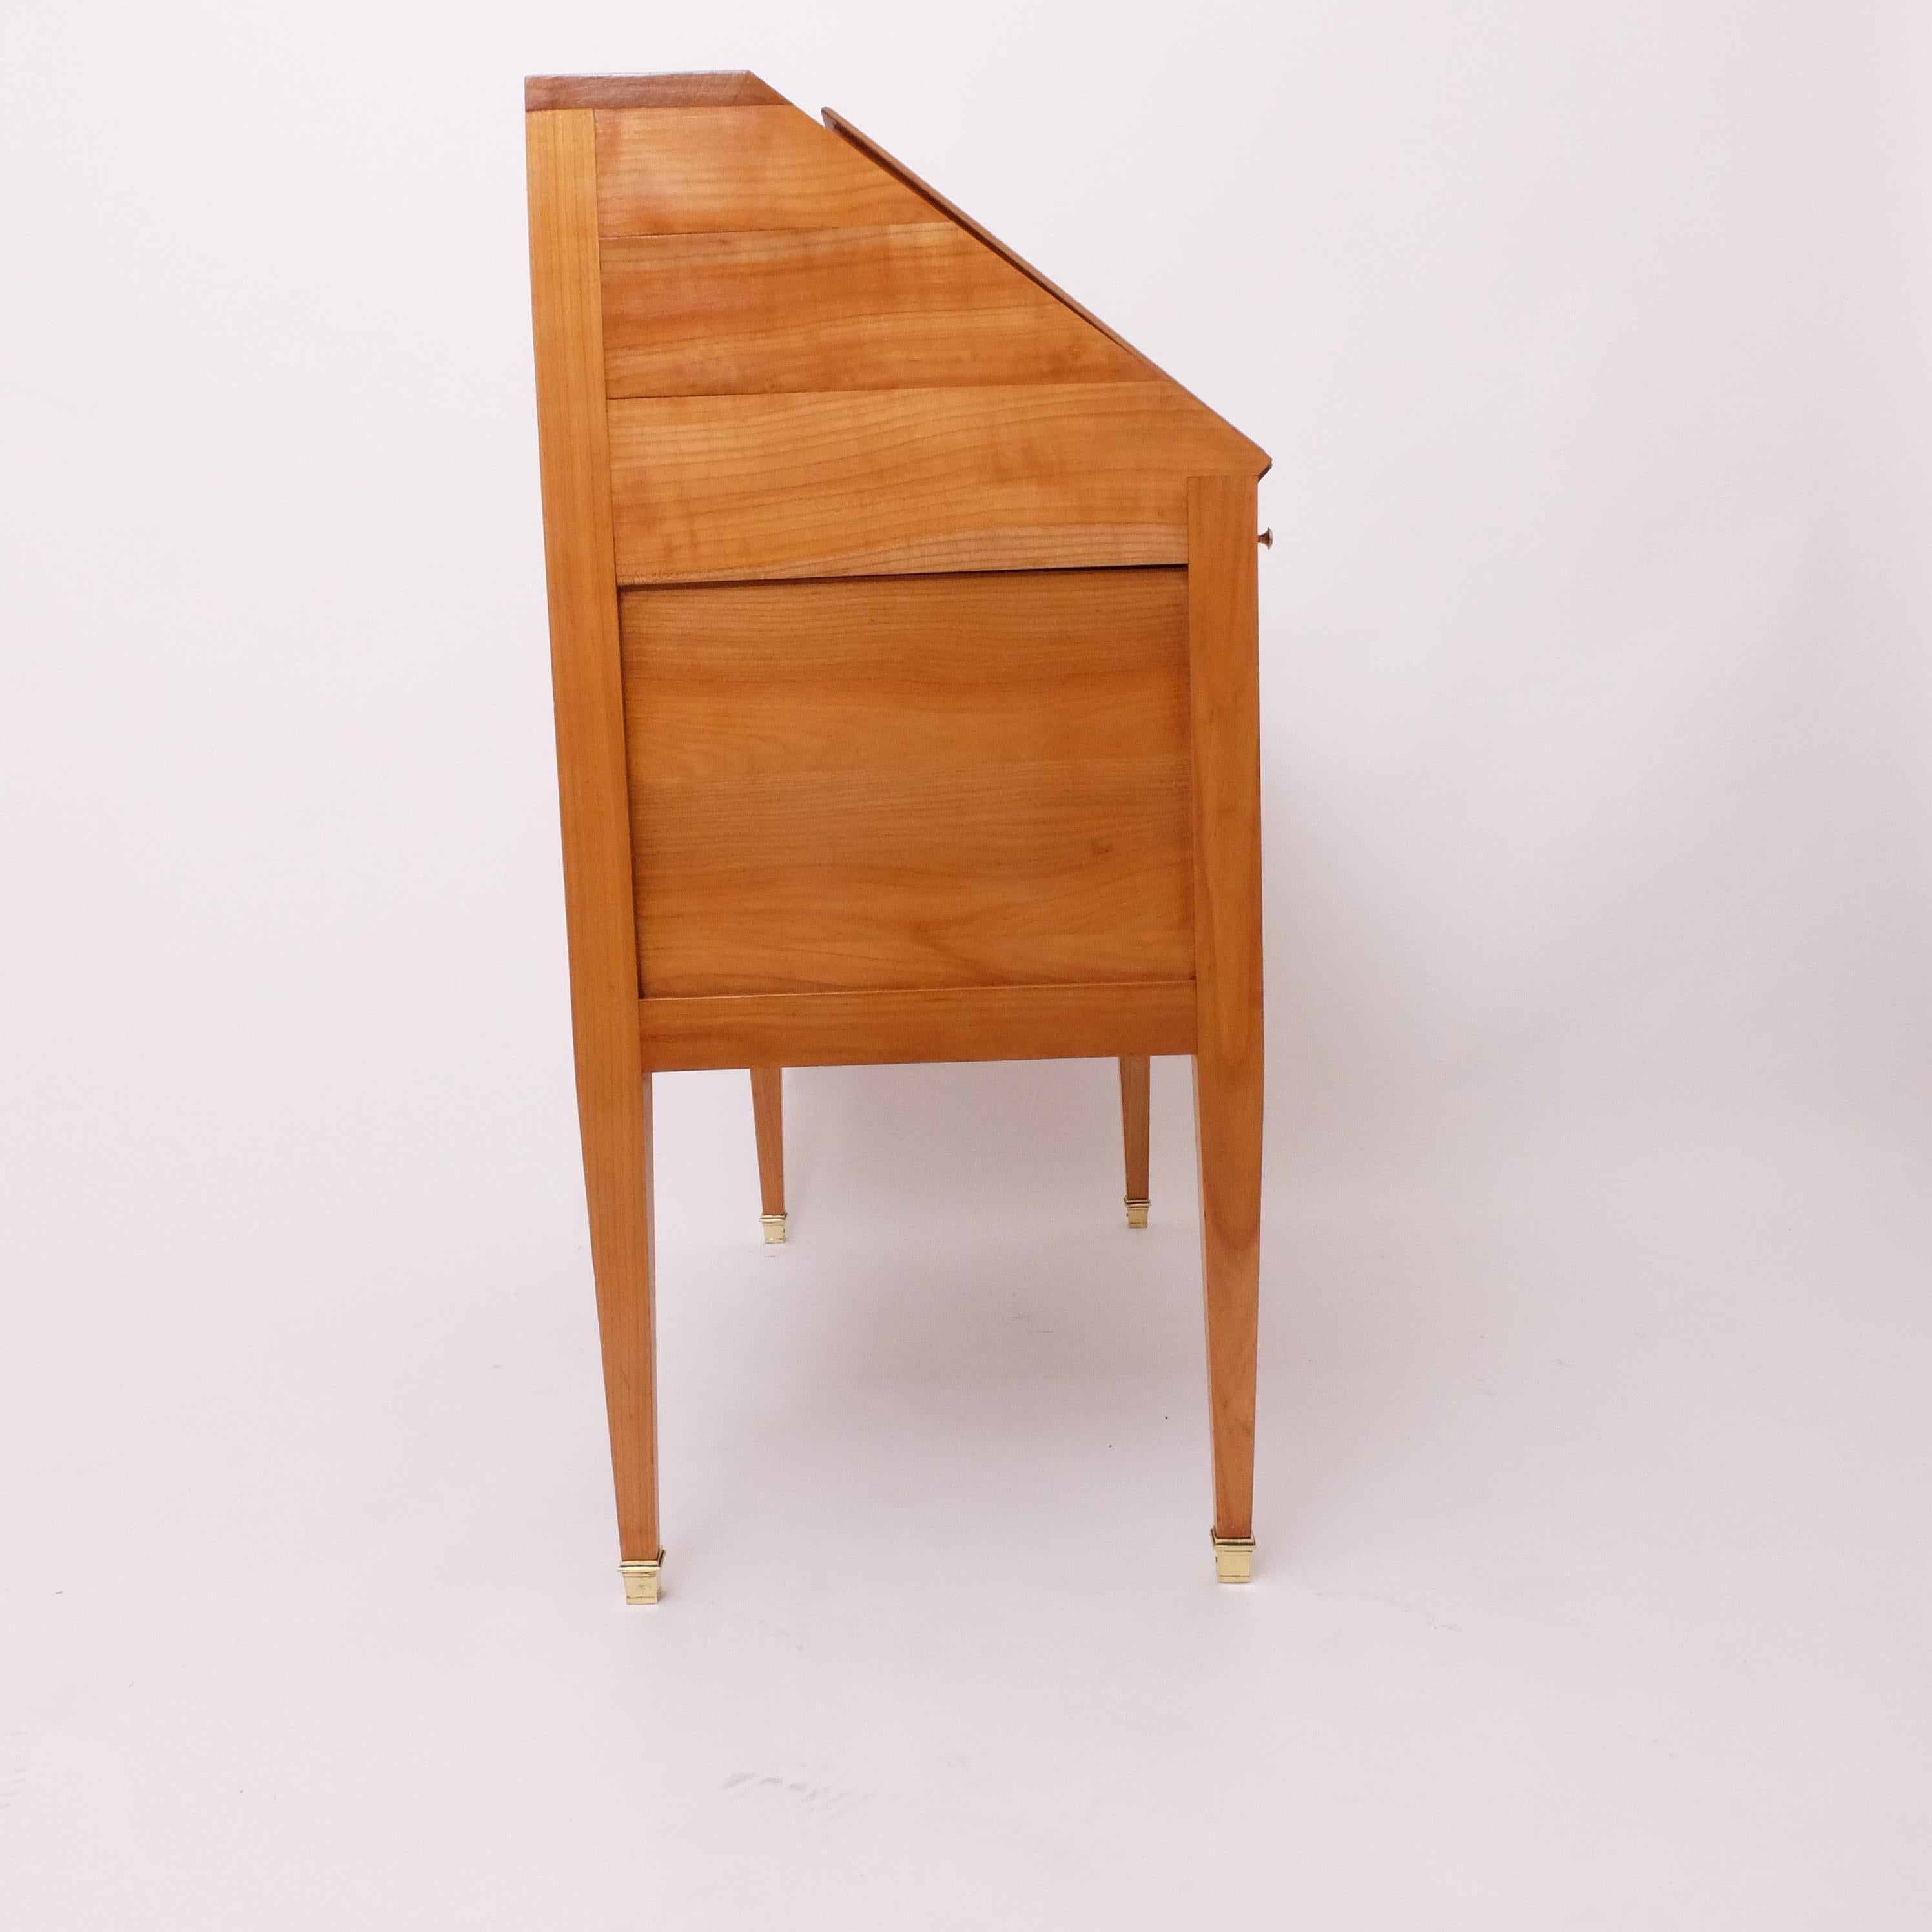 French In the style of Jacques Quinet Neo-classic Desk, 1958